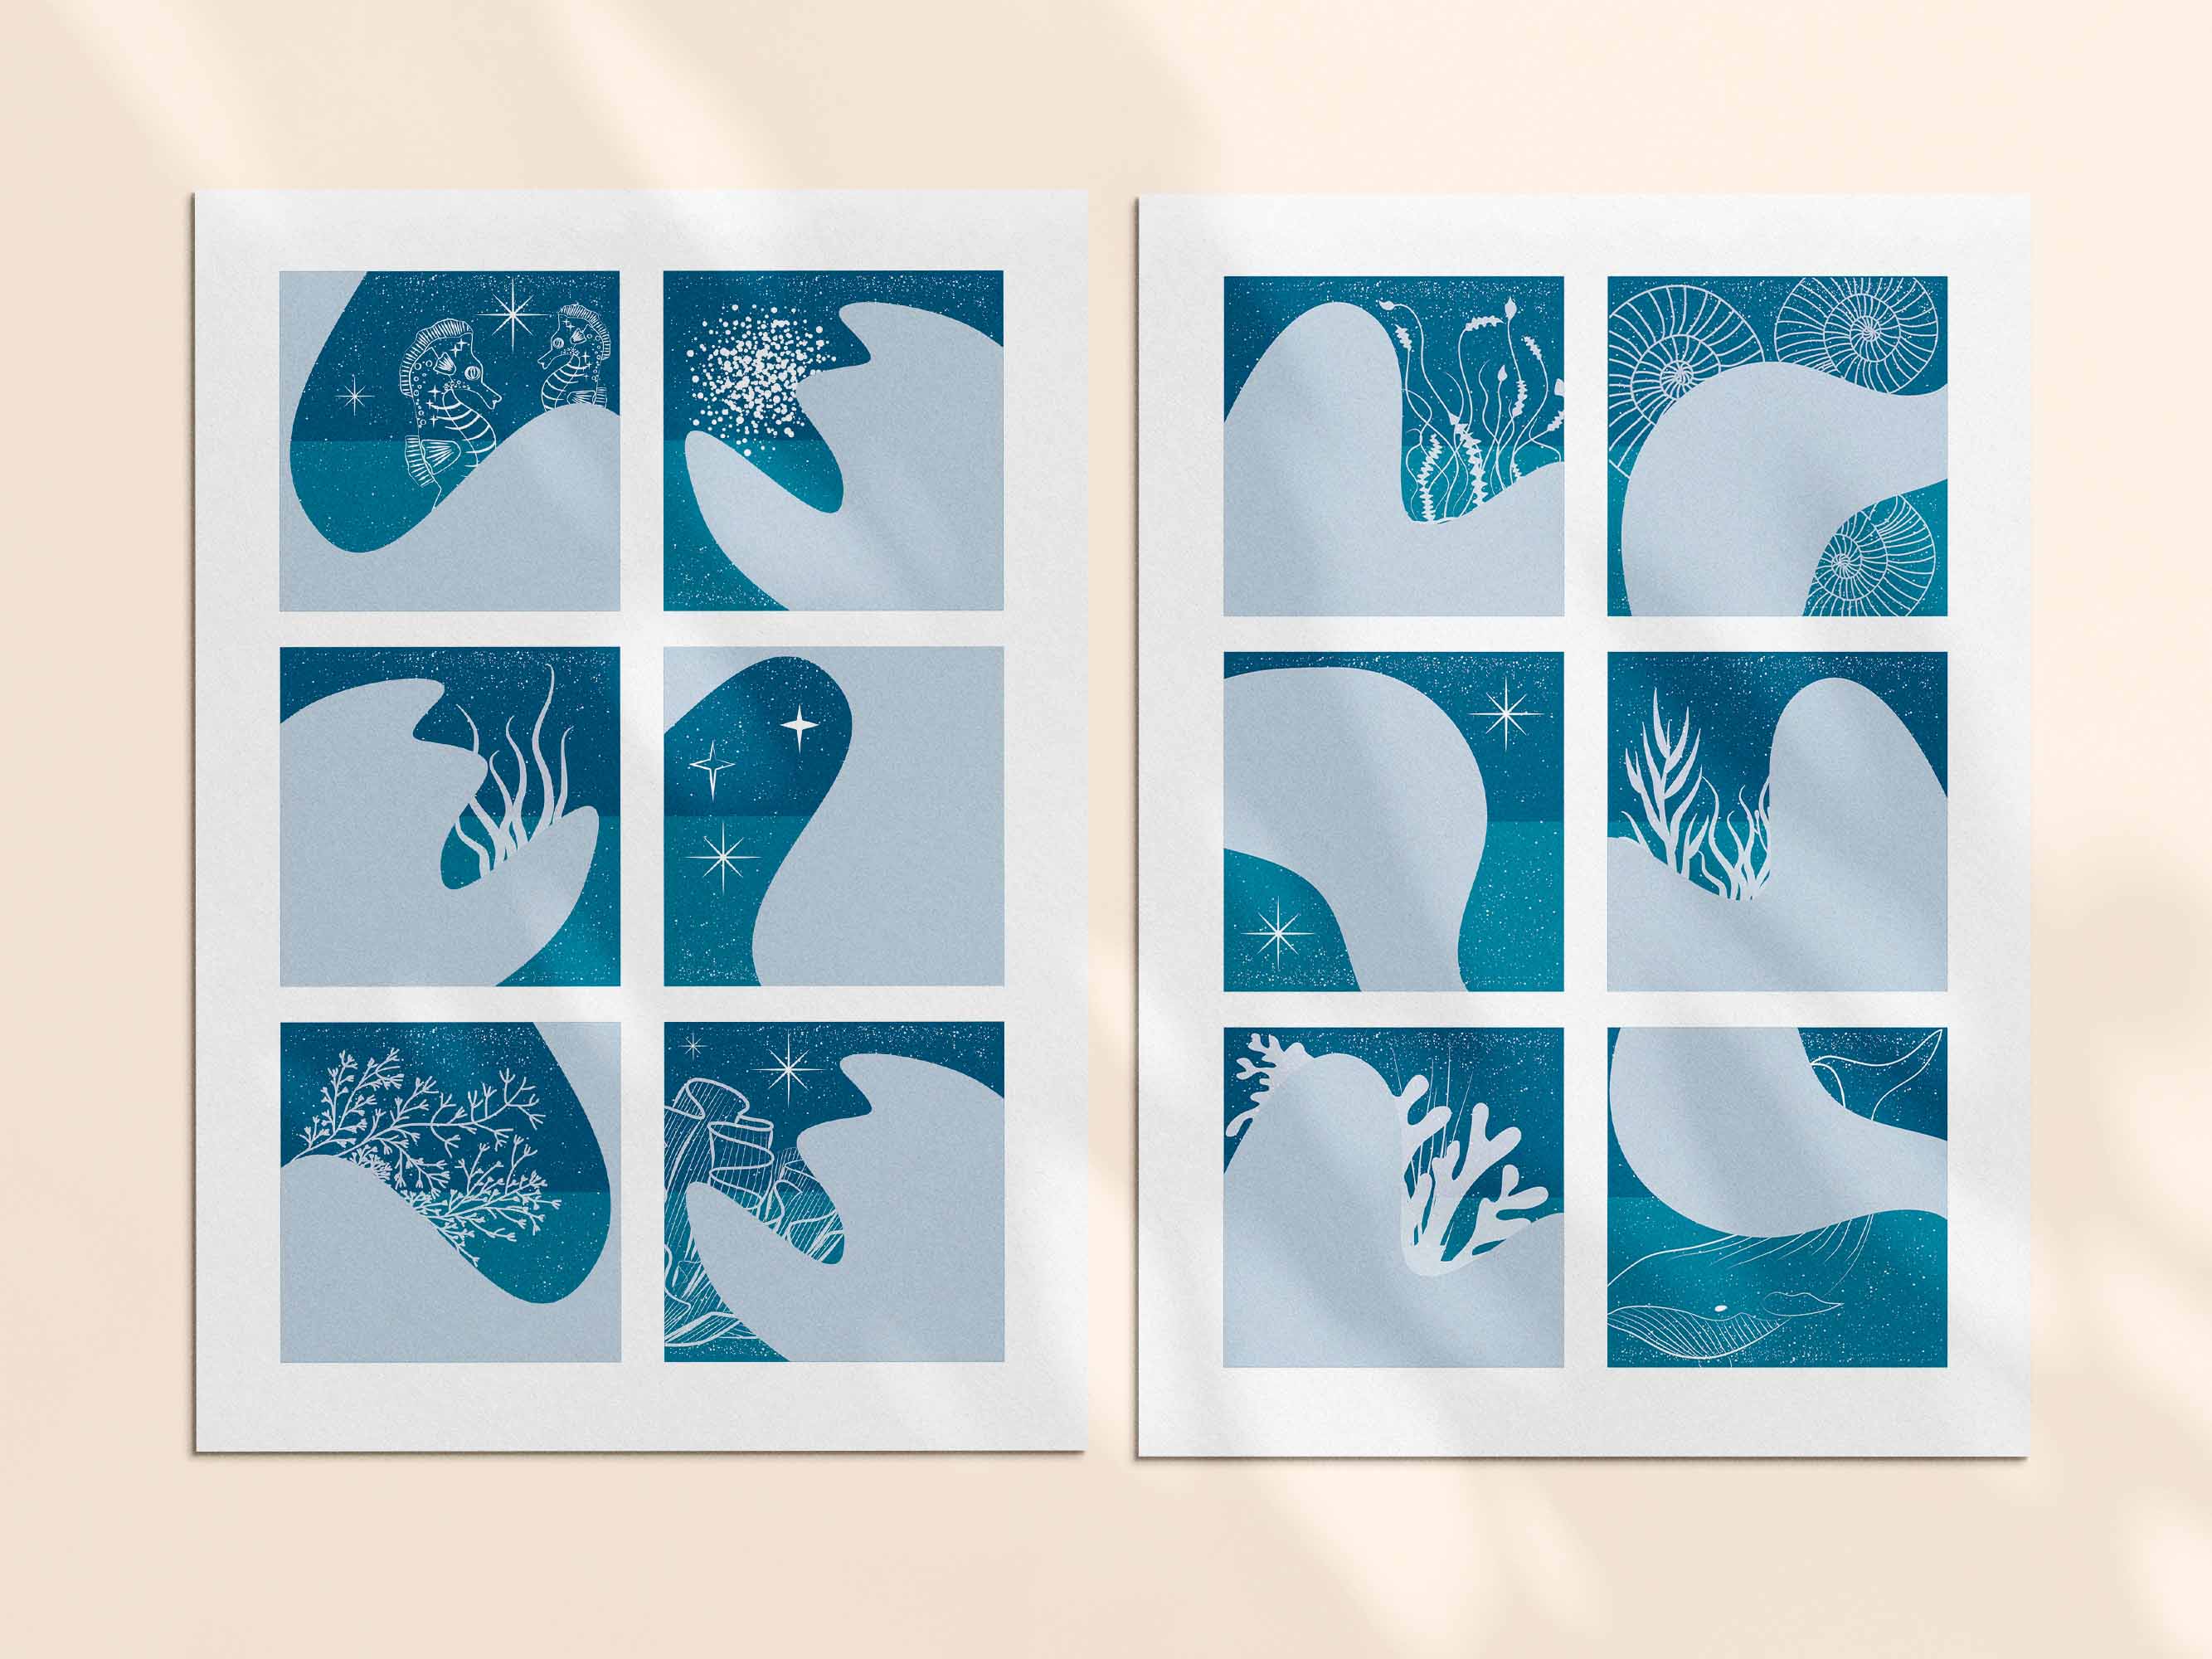 24 printable blank affirmation cards with a water, waves and sea theme. 